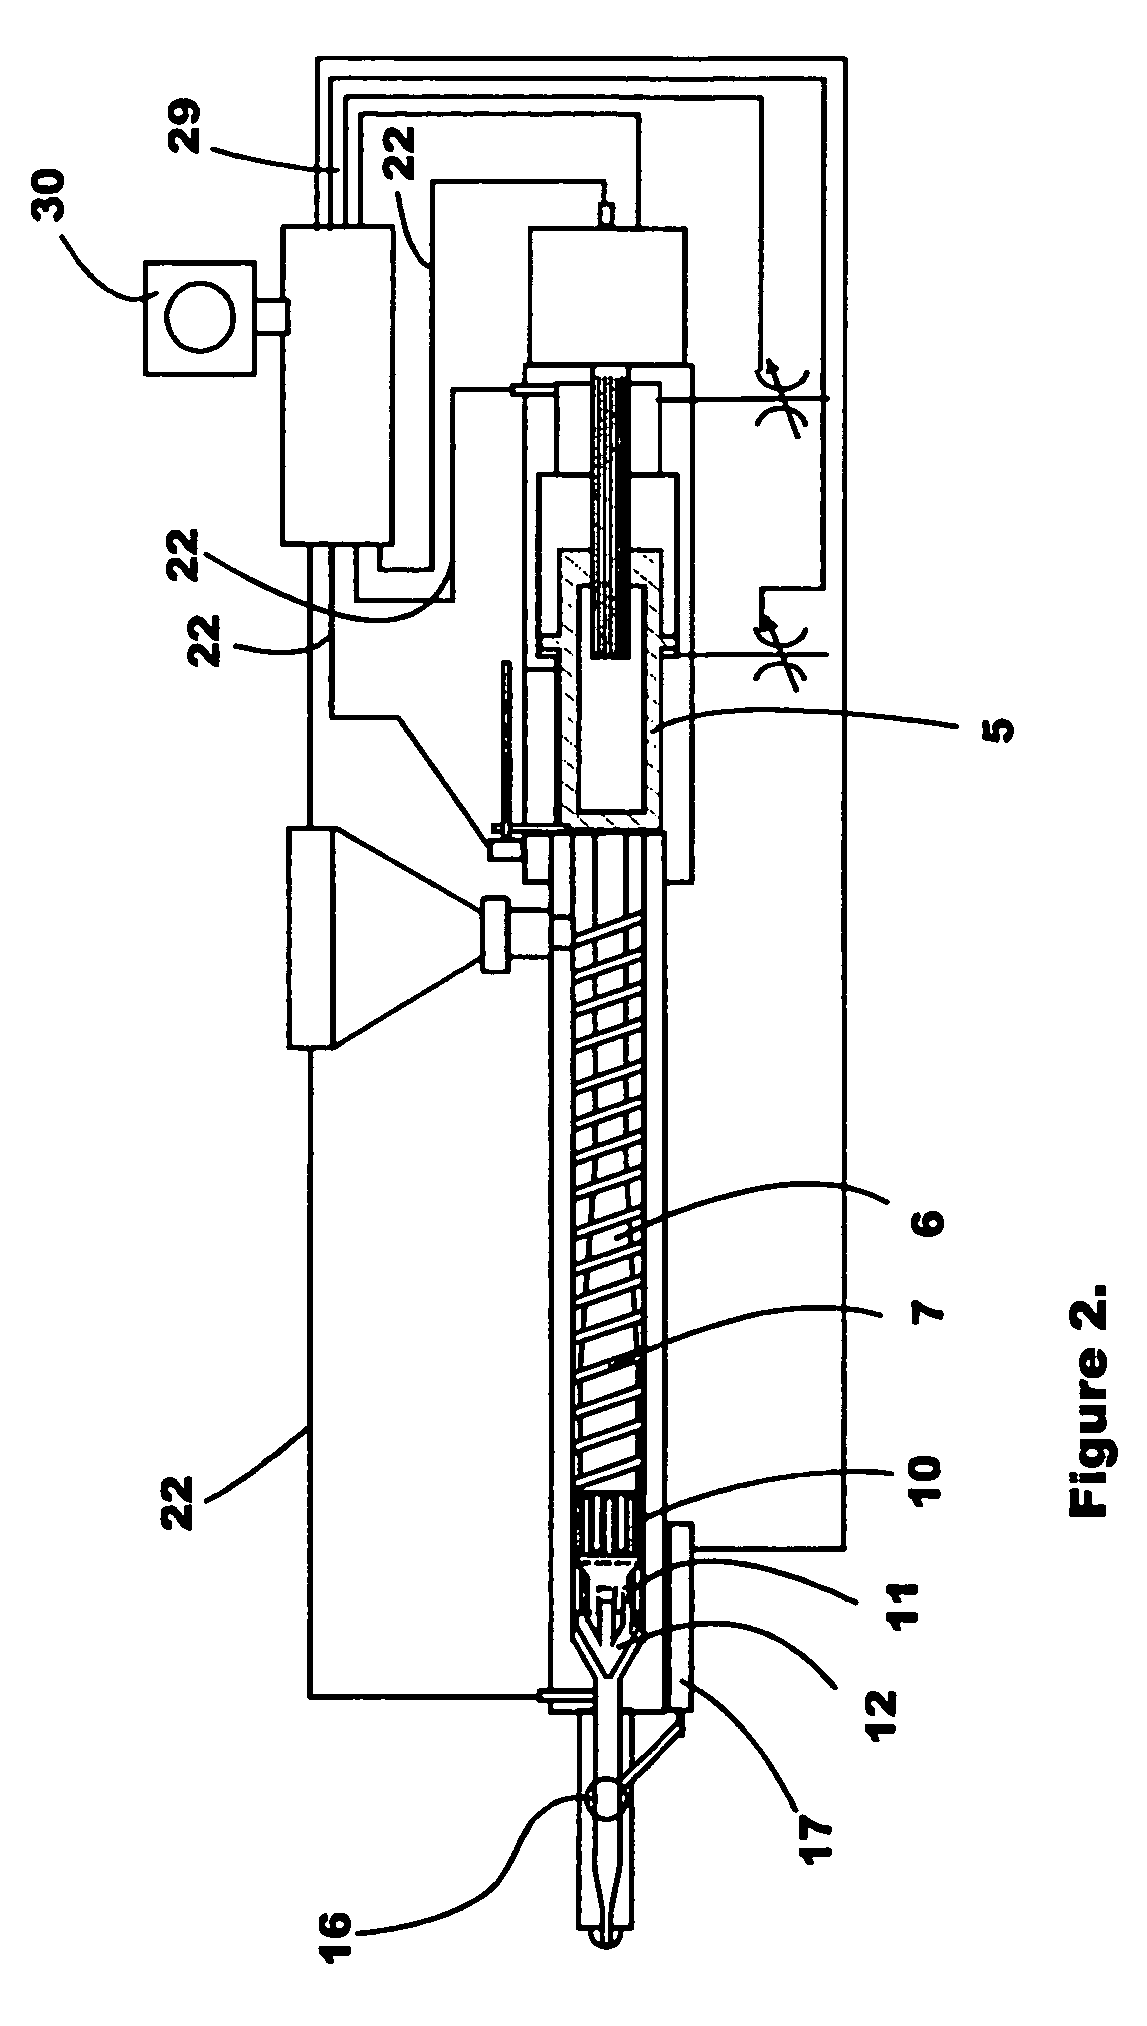 Injection molding method and apparatus for continuous plastication